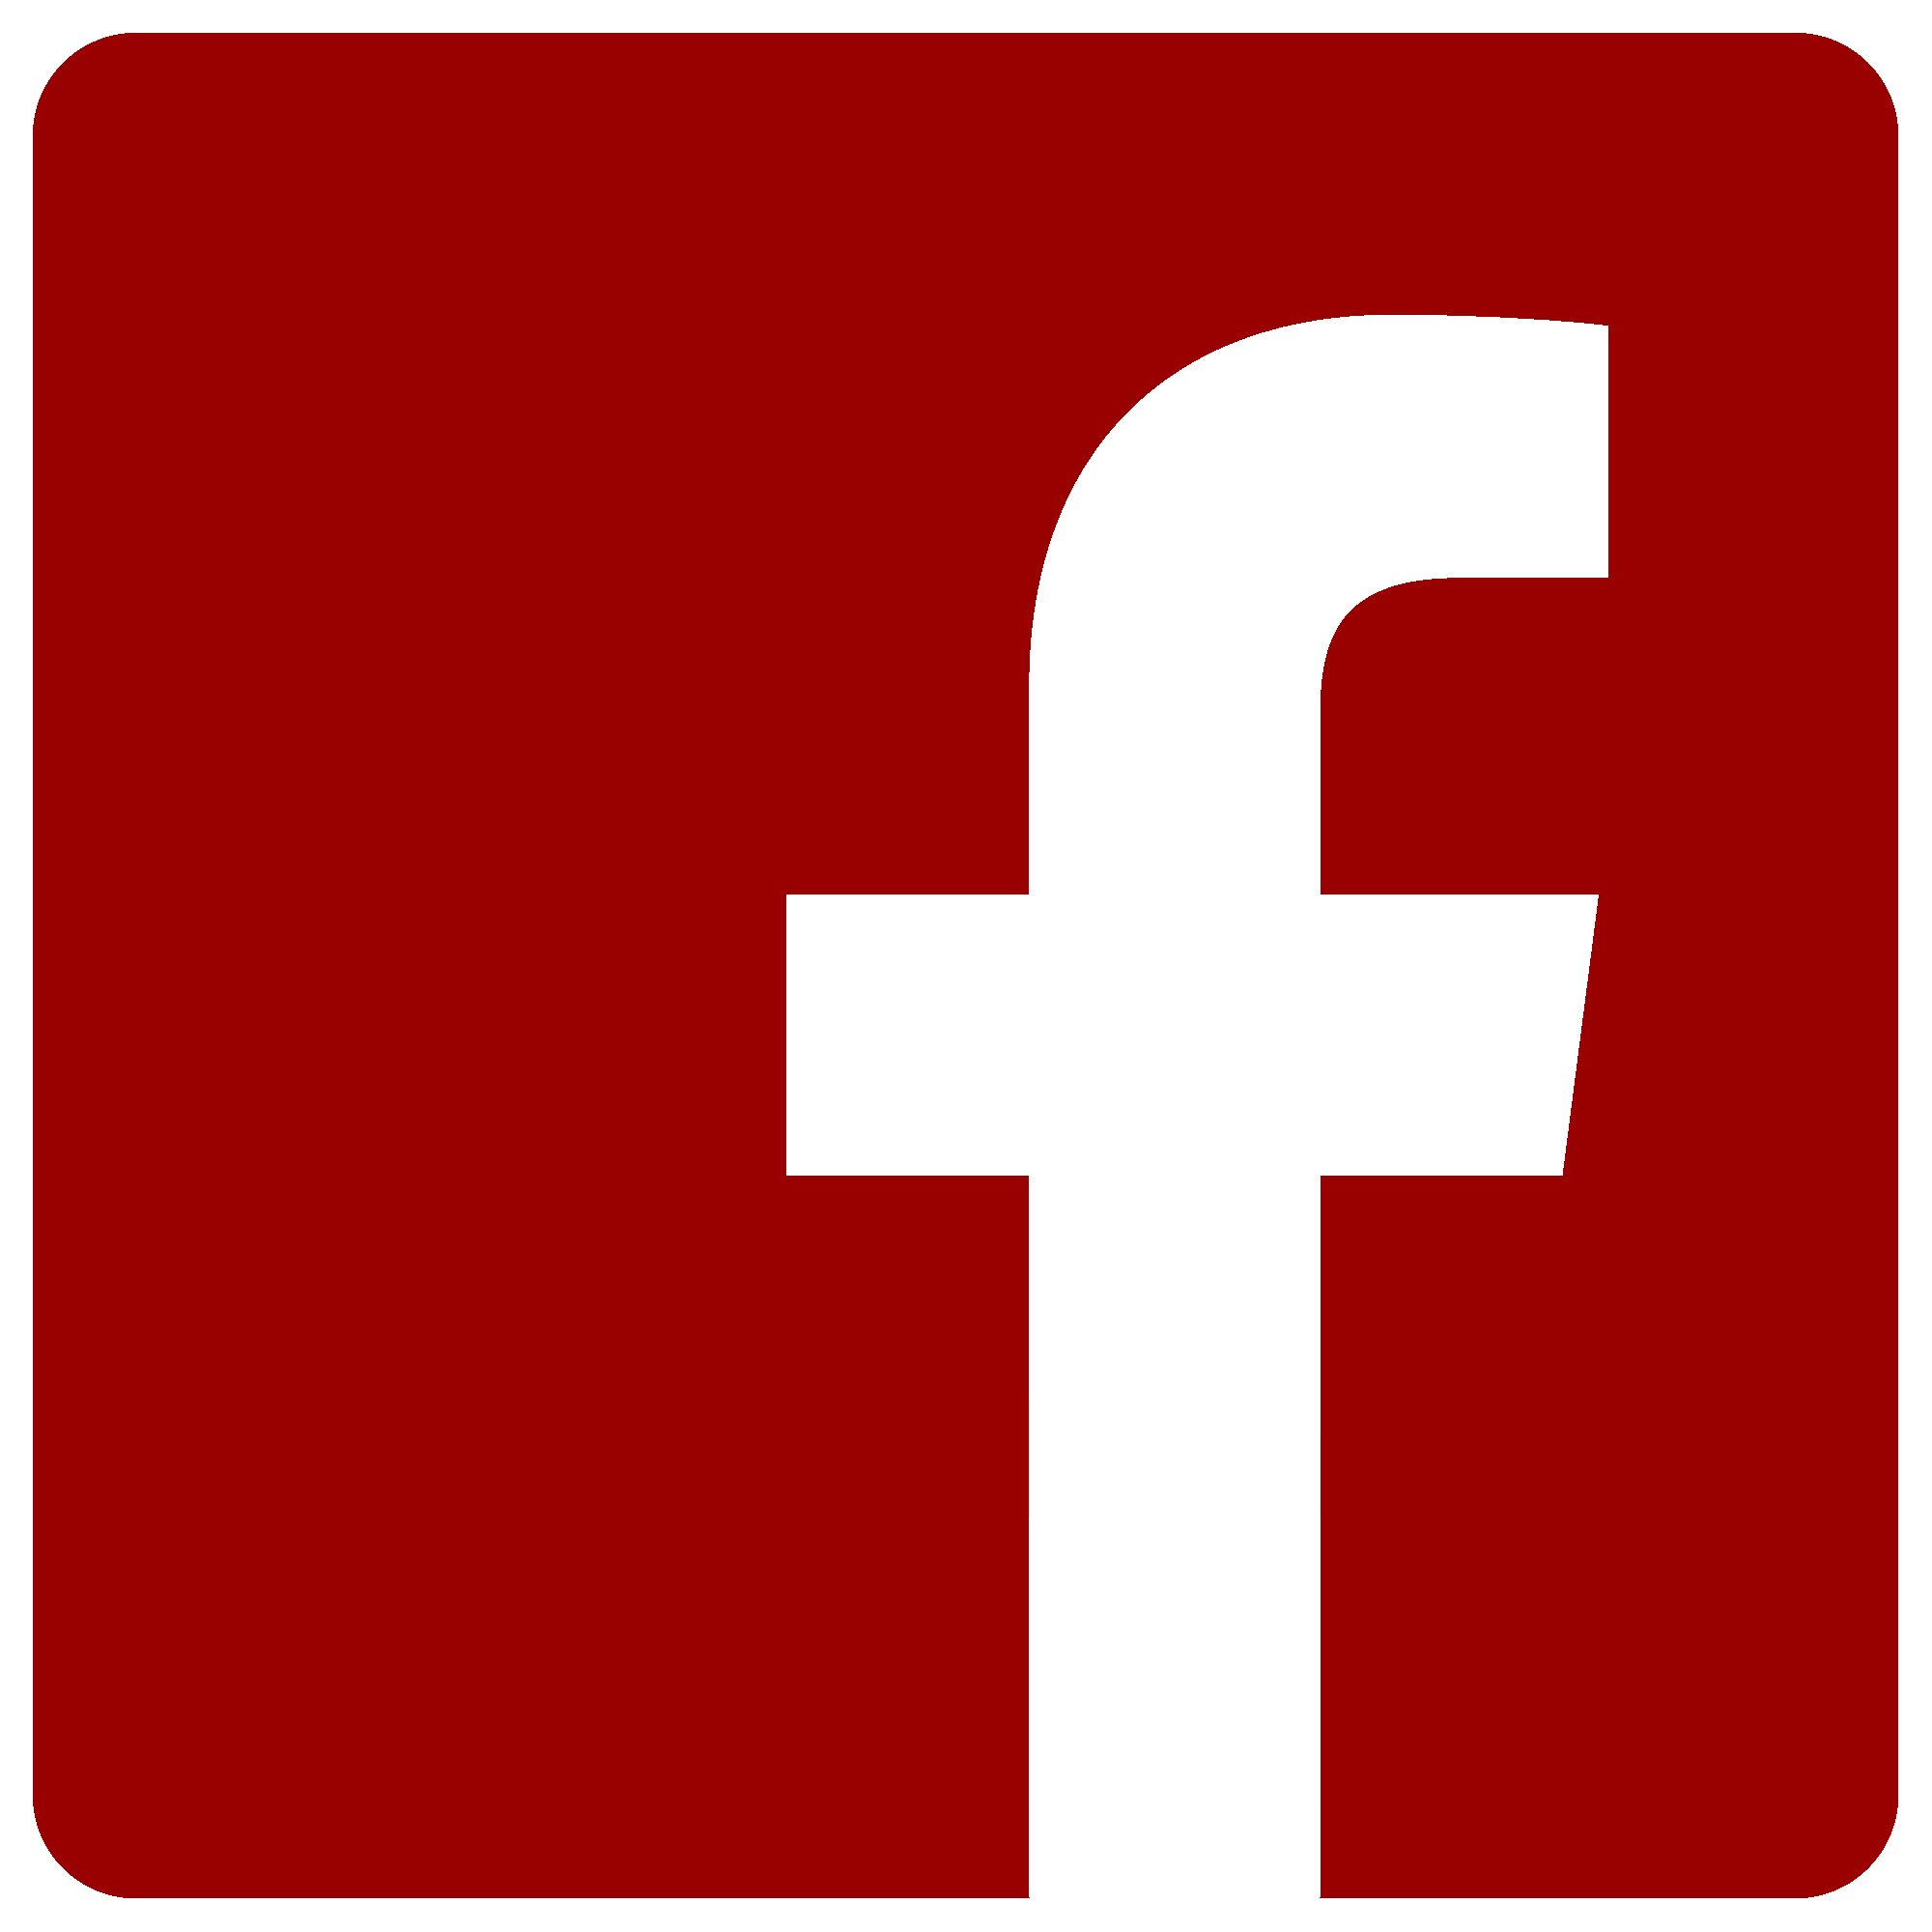 Red Facebook Logo - File:Facebook-logo-red.png - Wikimedia Commons